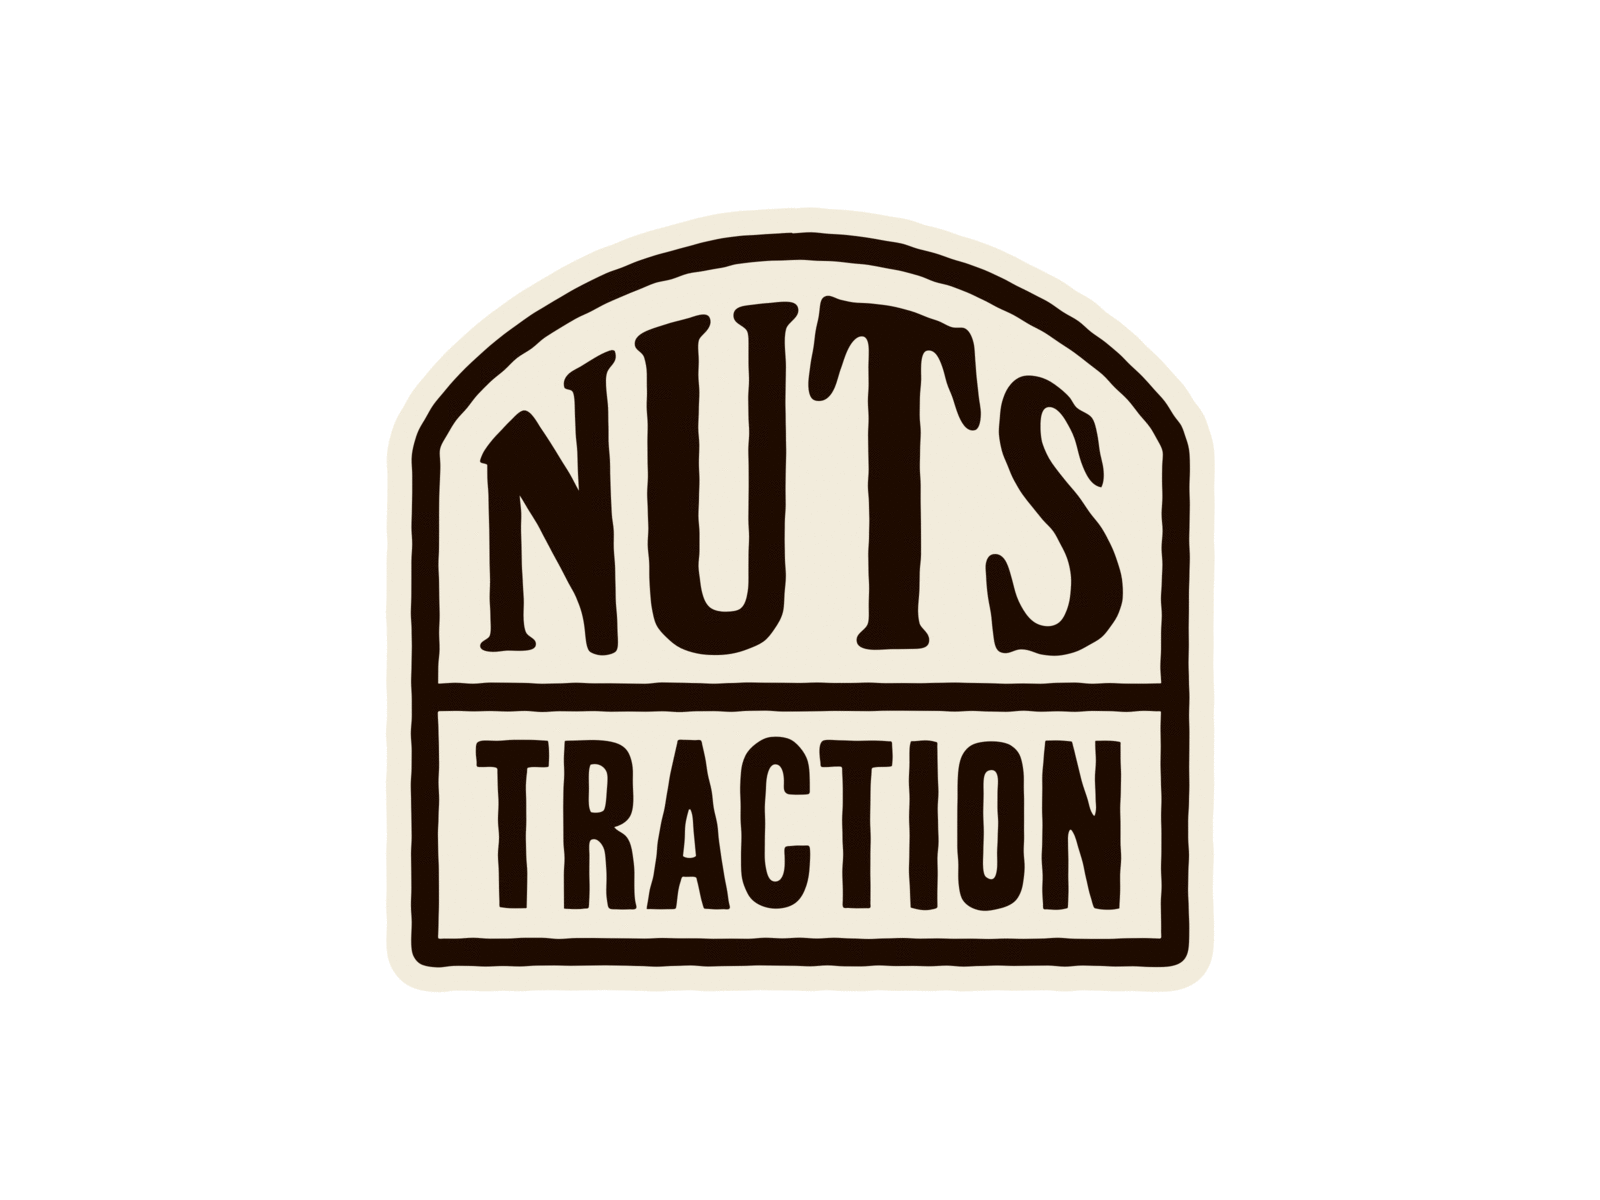 Nuts traction logo